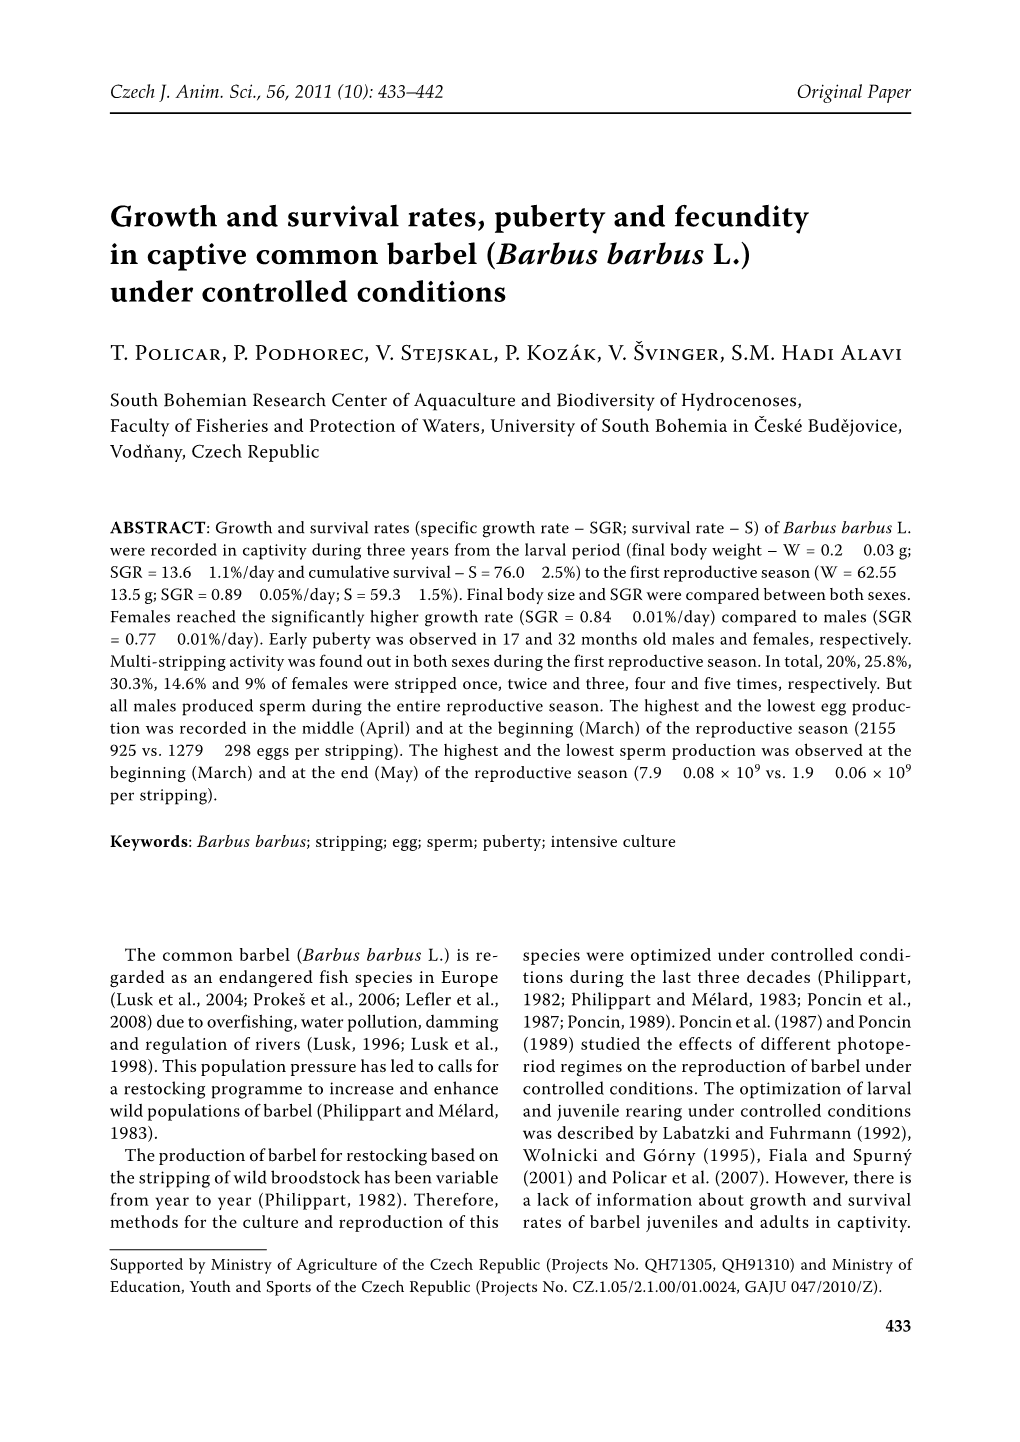 Growth and Survival Rates, Puberty and Fecundity in Captive Common Barbel (Barbus Barbus L.) Under Controlled Conditions